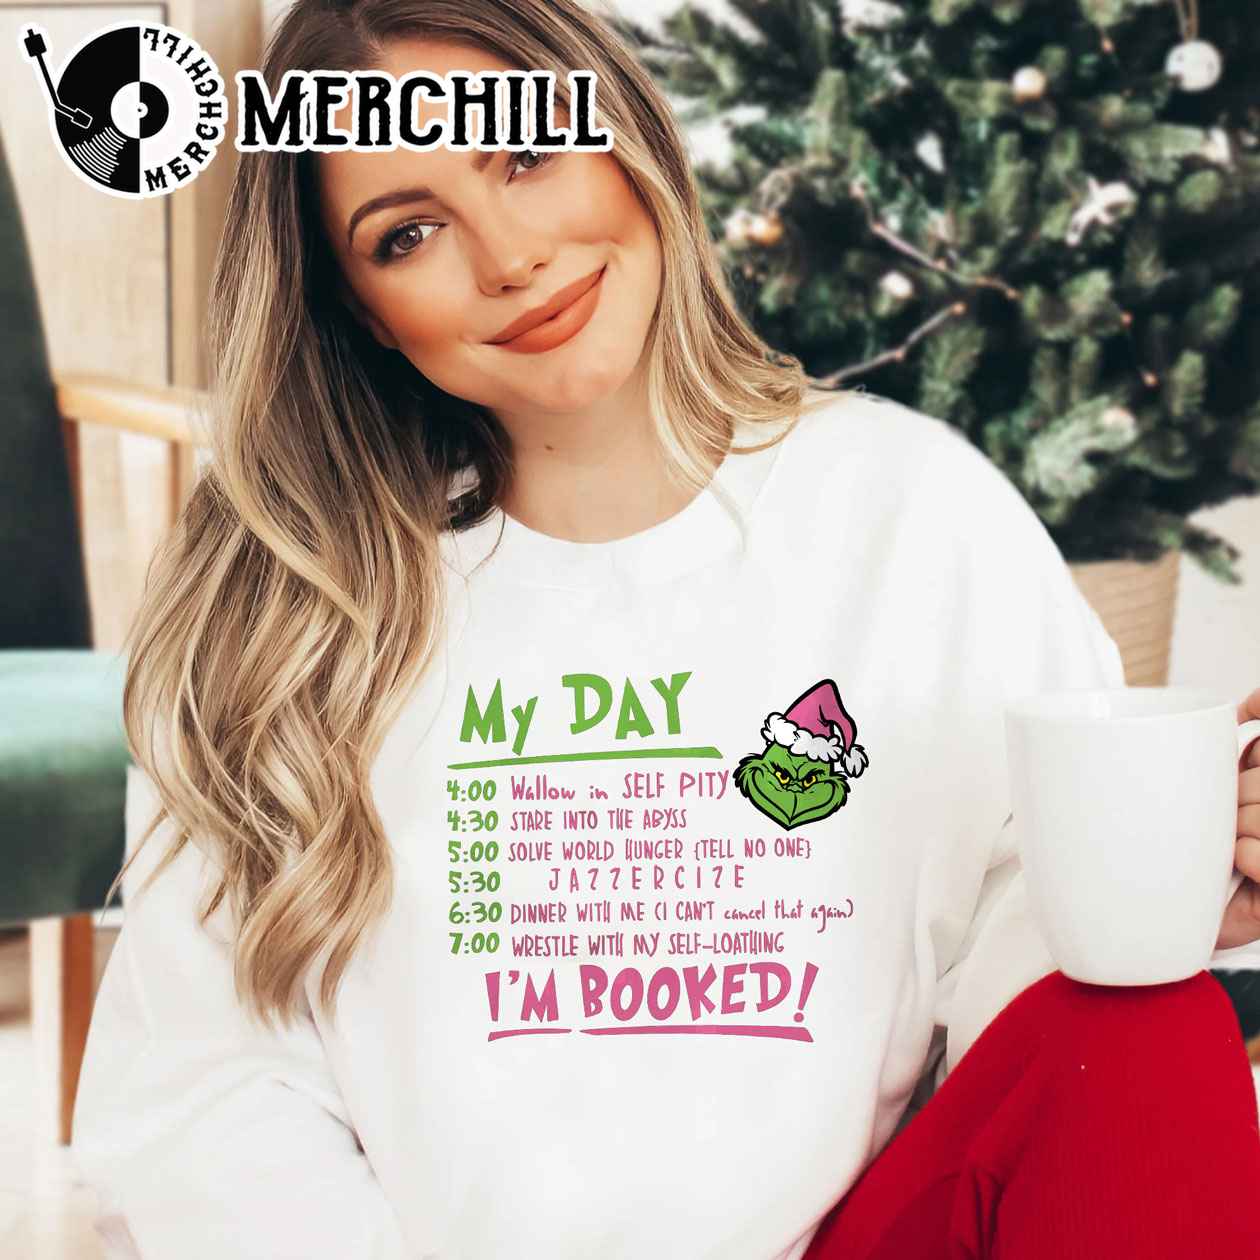 https://images.merchill.com/wp-content/uploads/2023/10/The-Grinch-Christmas-Schedule-Funny-Sweatshirt-My-Day-Im-Booked-2.jpg